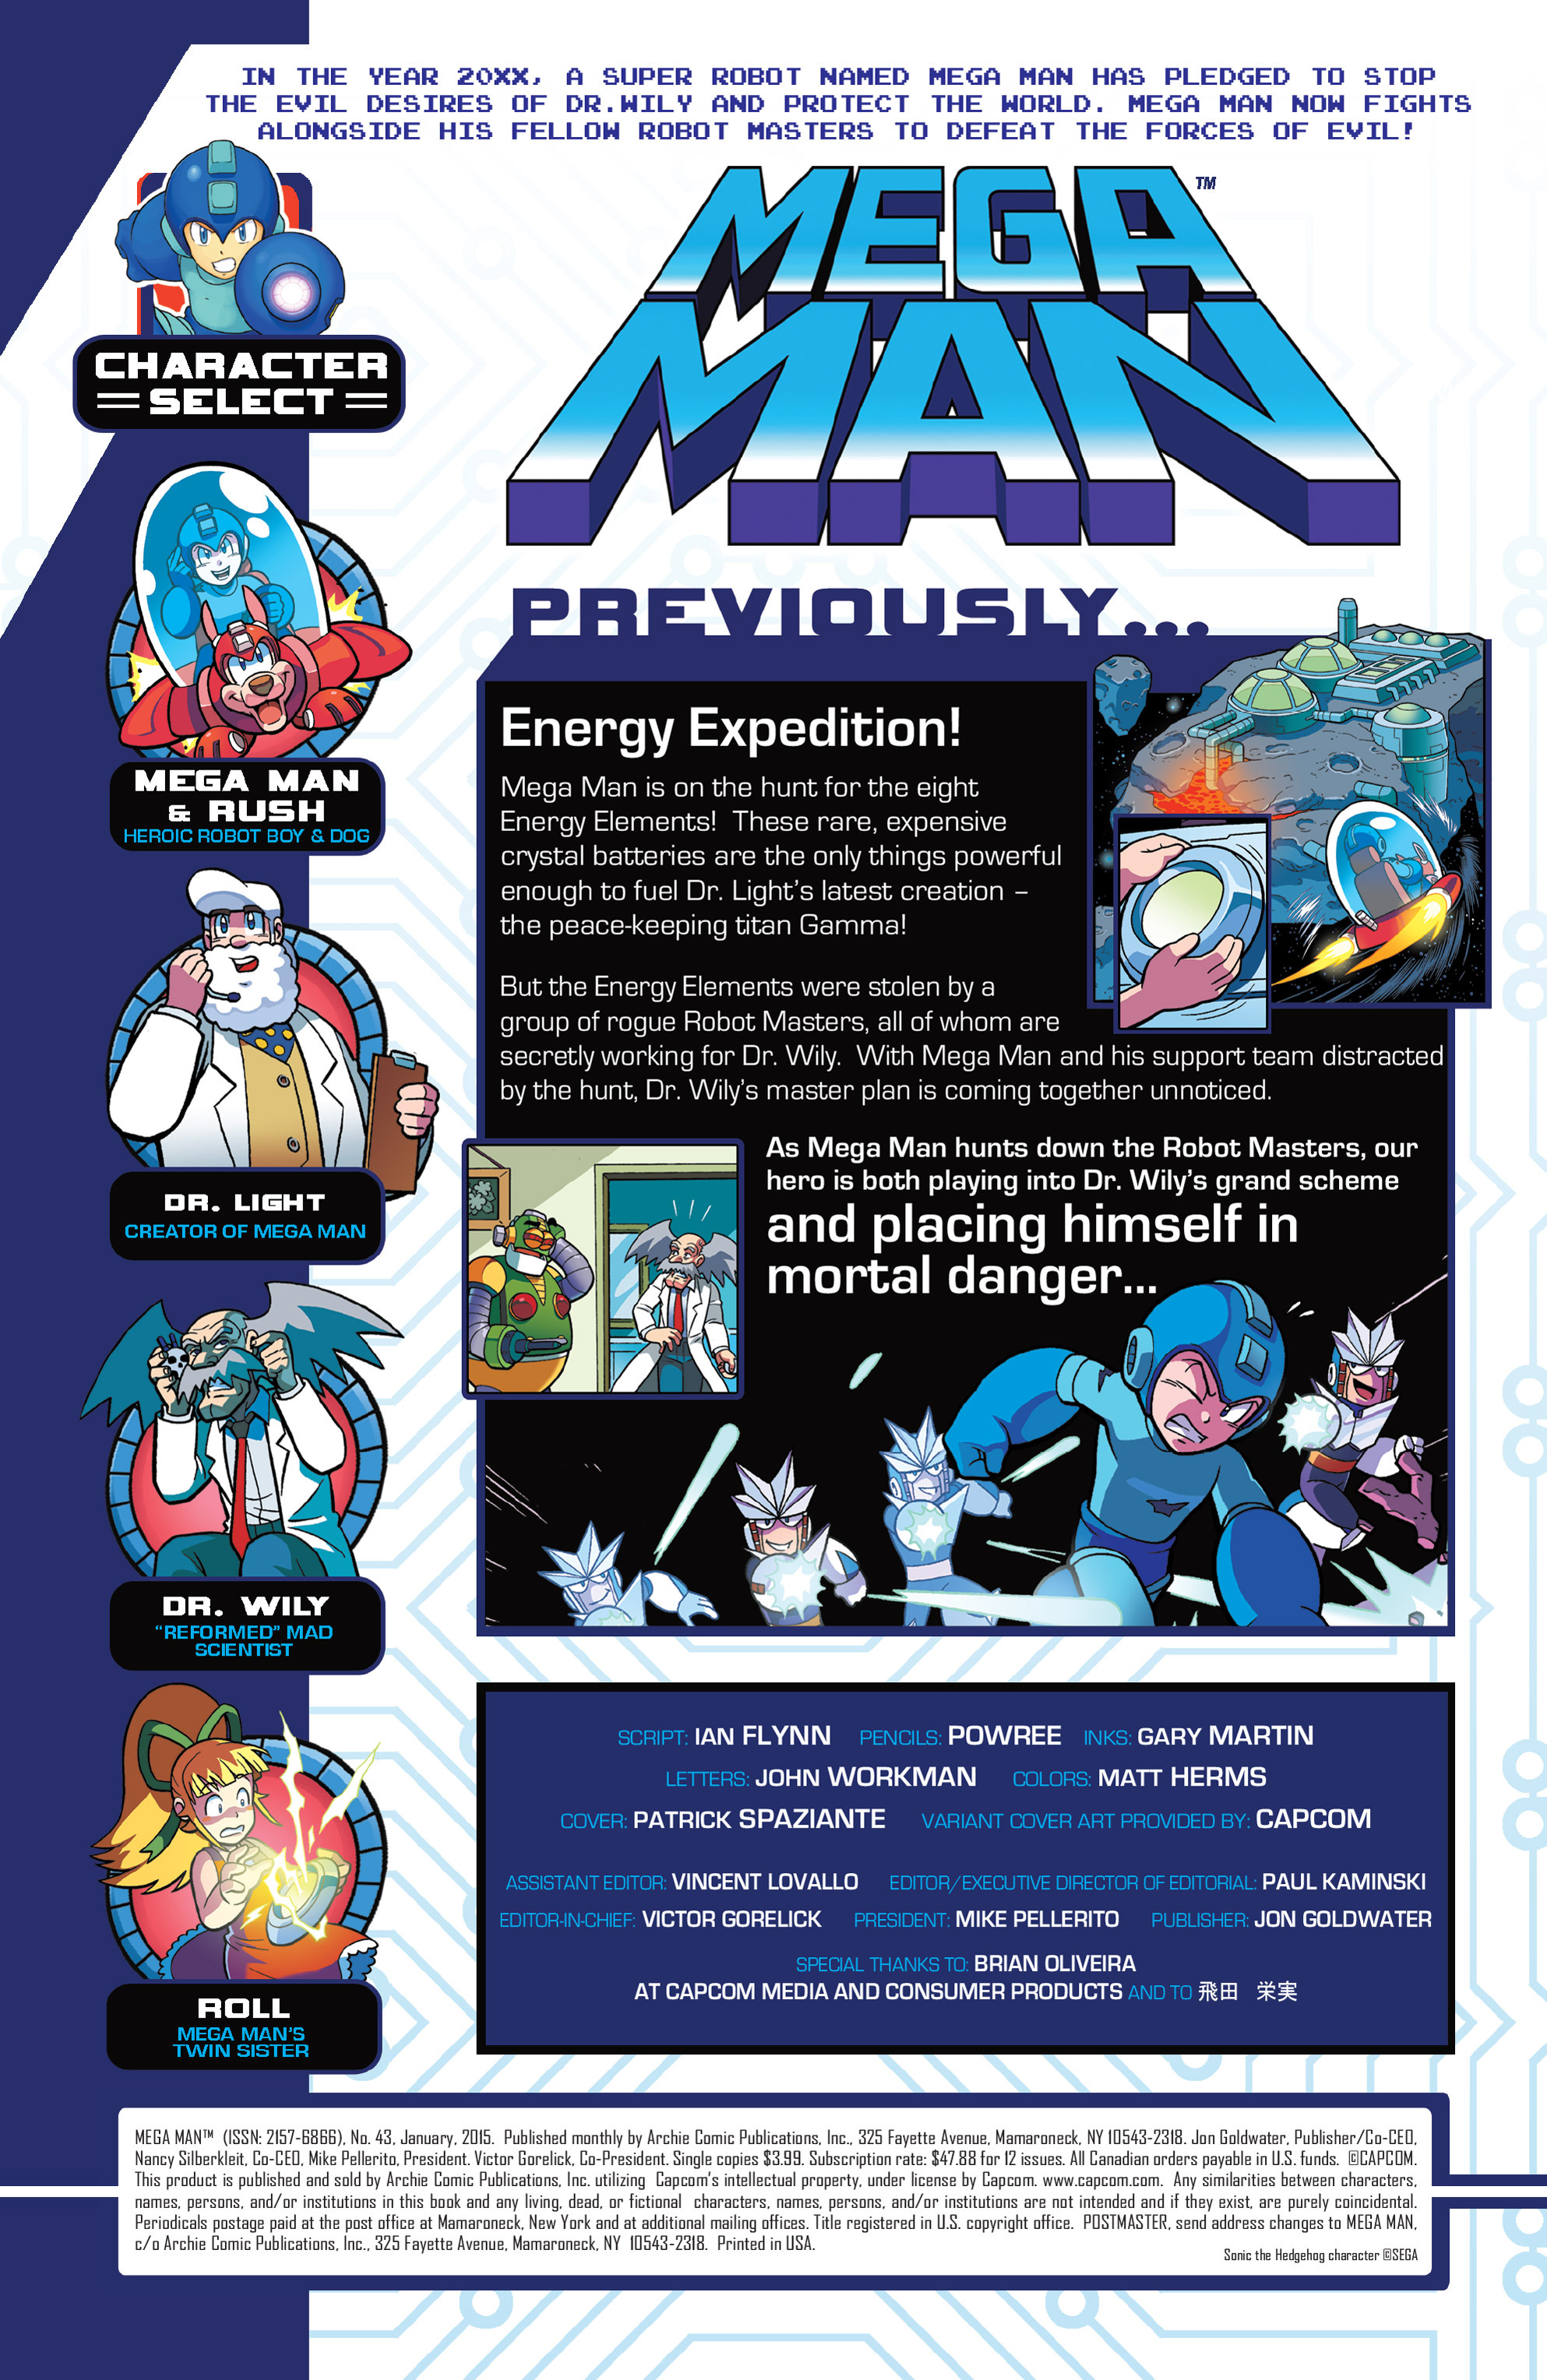 Mega Man Issue 43 | Read Mega Man Issue 43 comic online in high quality.  Read Full Comic online for free - Read comics online in high quality .